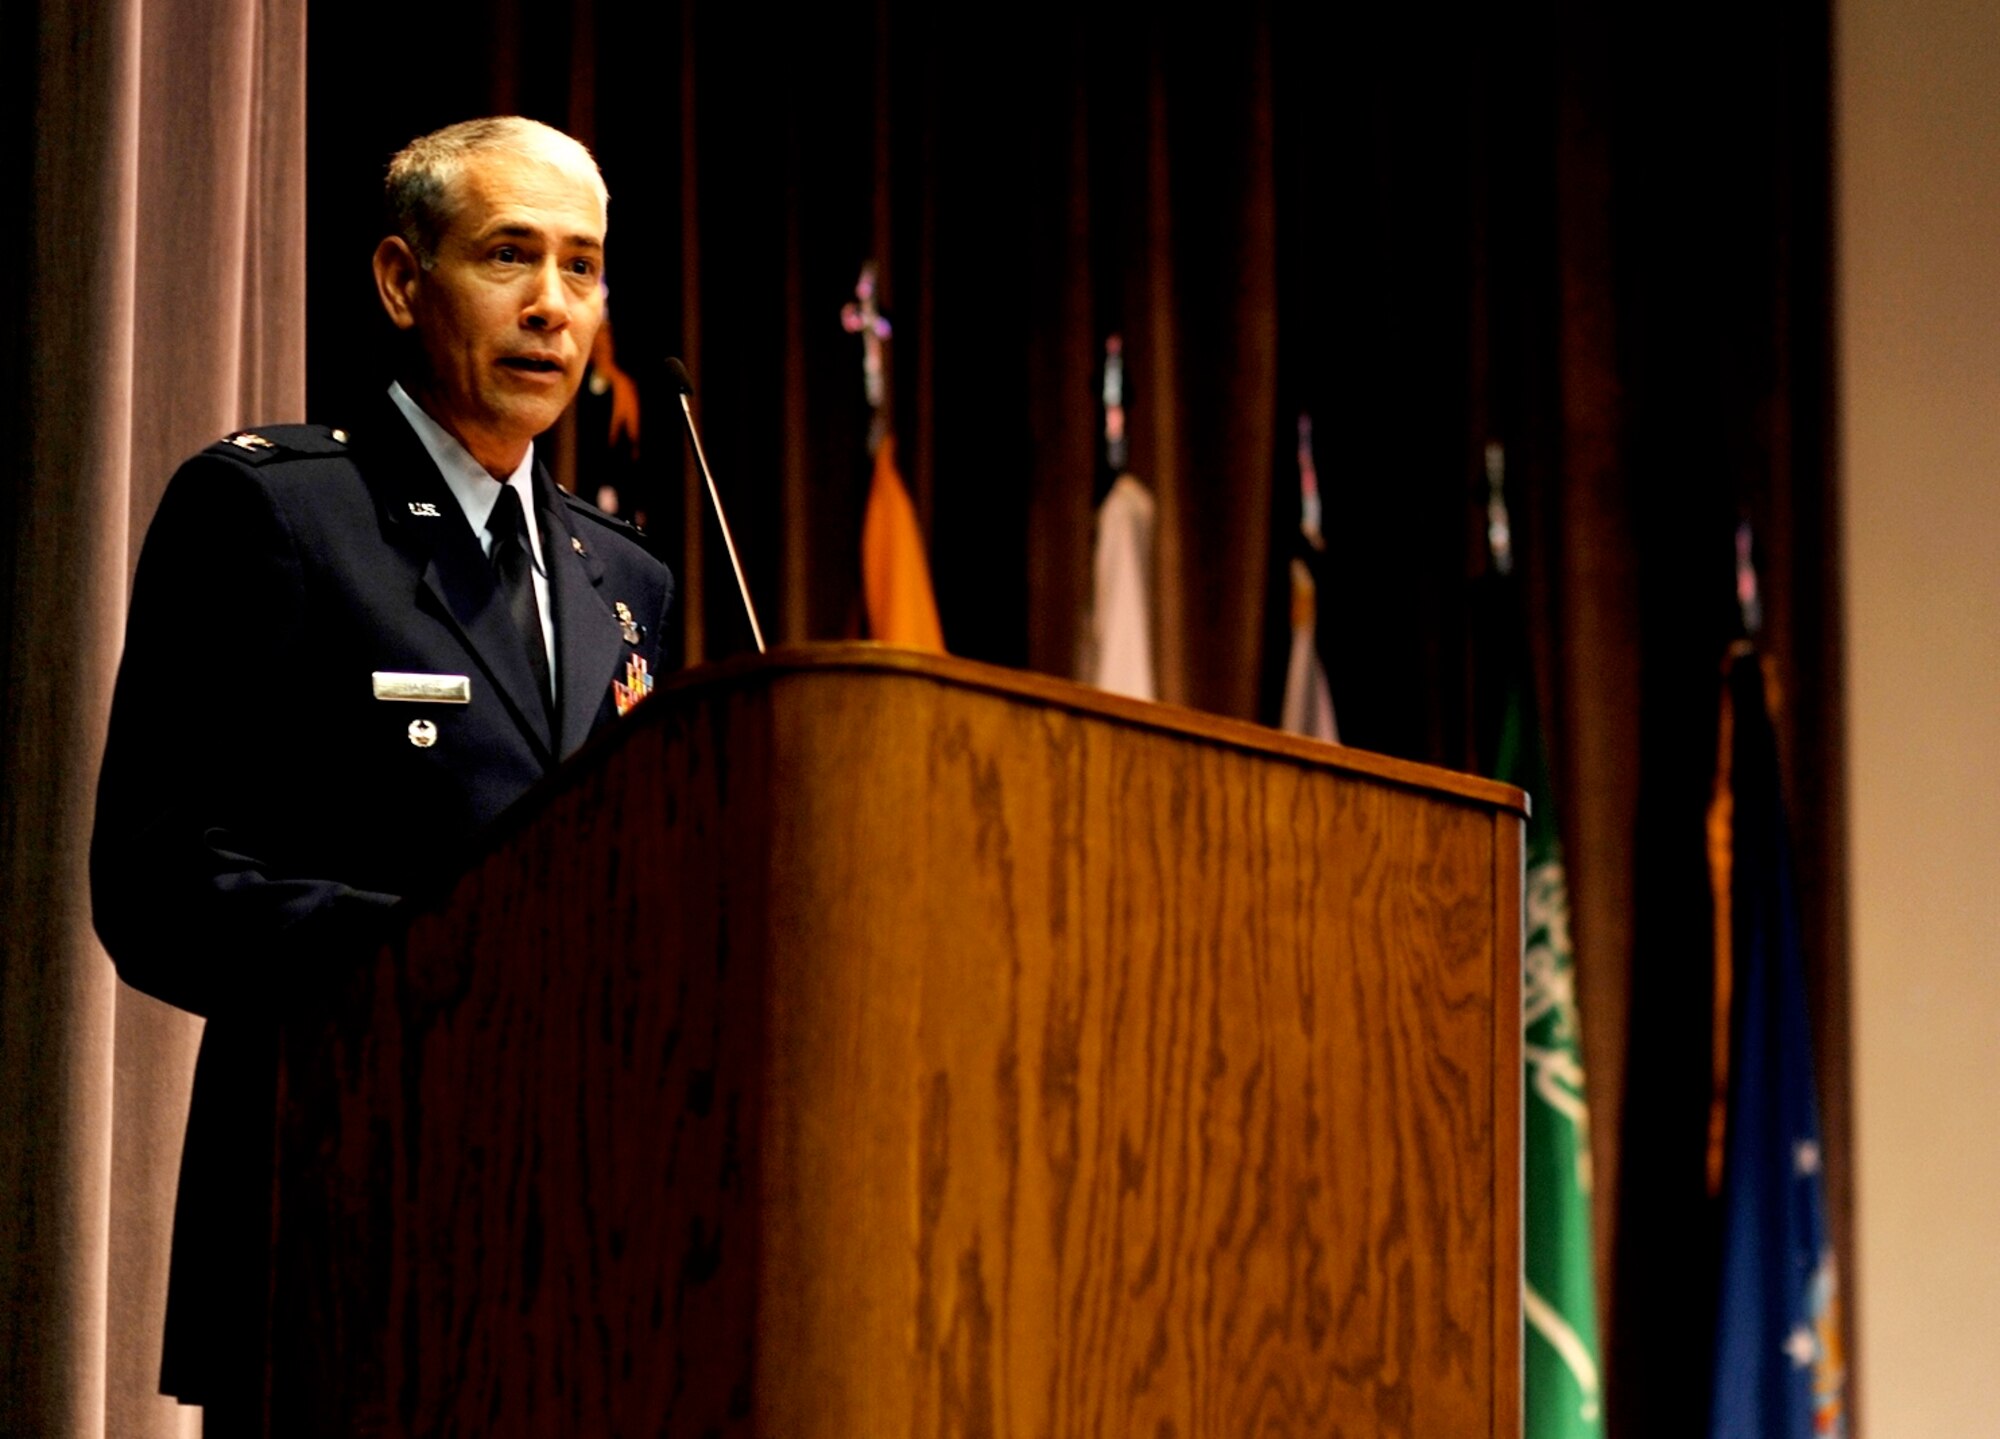 Col. Jerome Hayes, the Individual Mobilization Augmentee to the Division Chief, Air Force Senate Liaison, Office of the Secretary of the Air Force, the Pentagon, speaks to Specialized Undergraduate Pilot Training Class 16-01 during their graduation ceremony Oct. 23 on Columbus Air Force Base, Mississippi. Hayes imparted his words of wisdom to the newest aviators, stressing readiness and preparedness as paramount to success in the Air Force and in their personal lives. (U.S. Air Force photo/Elizabeth Owens)